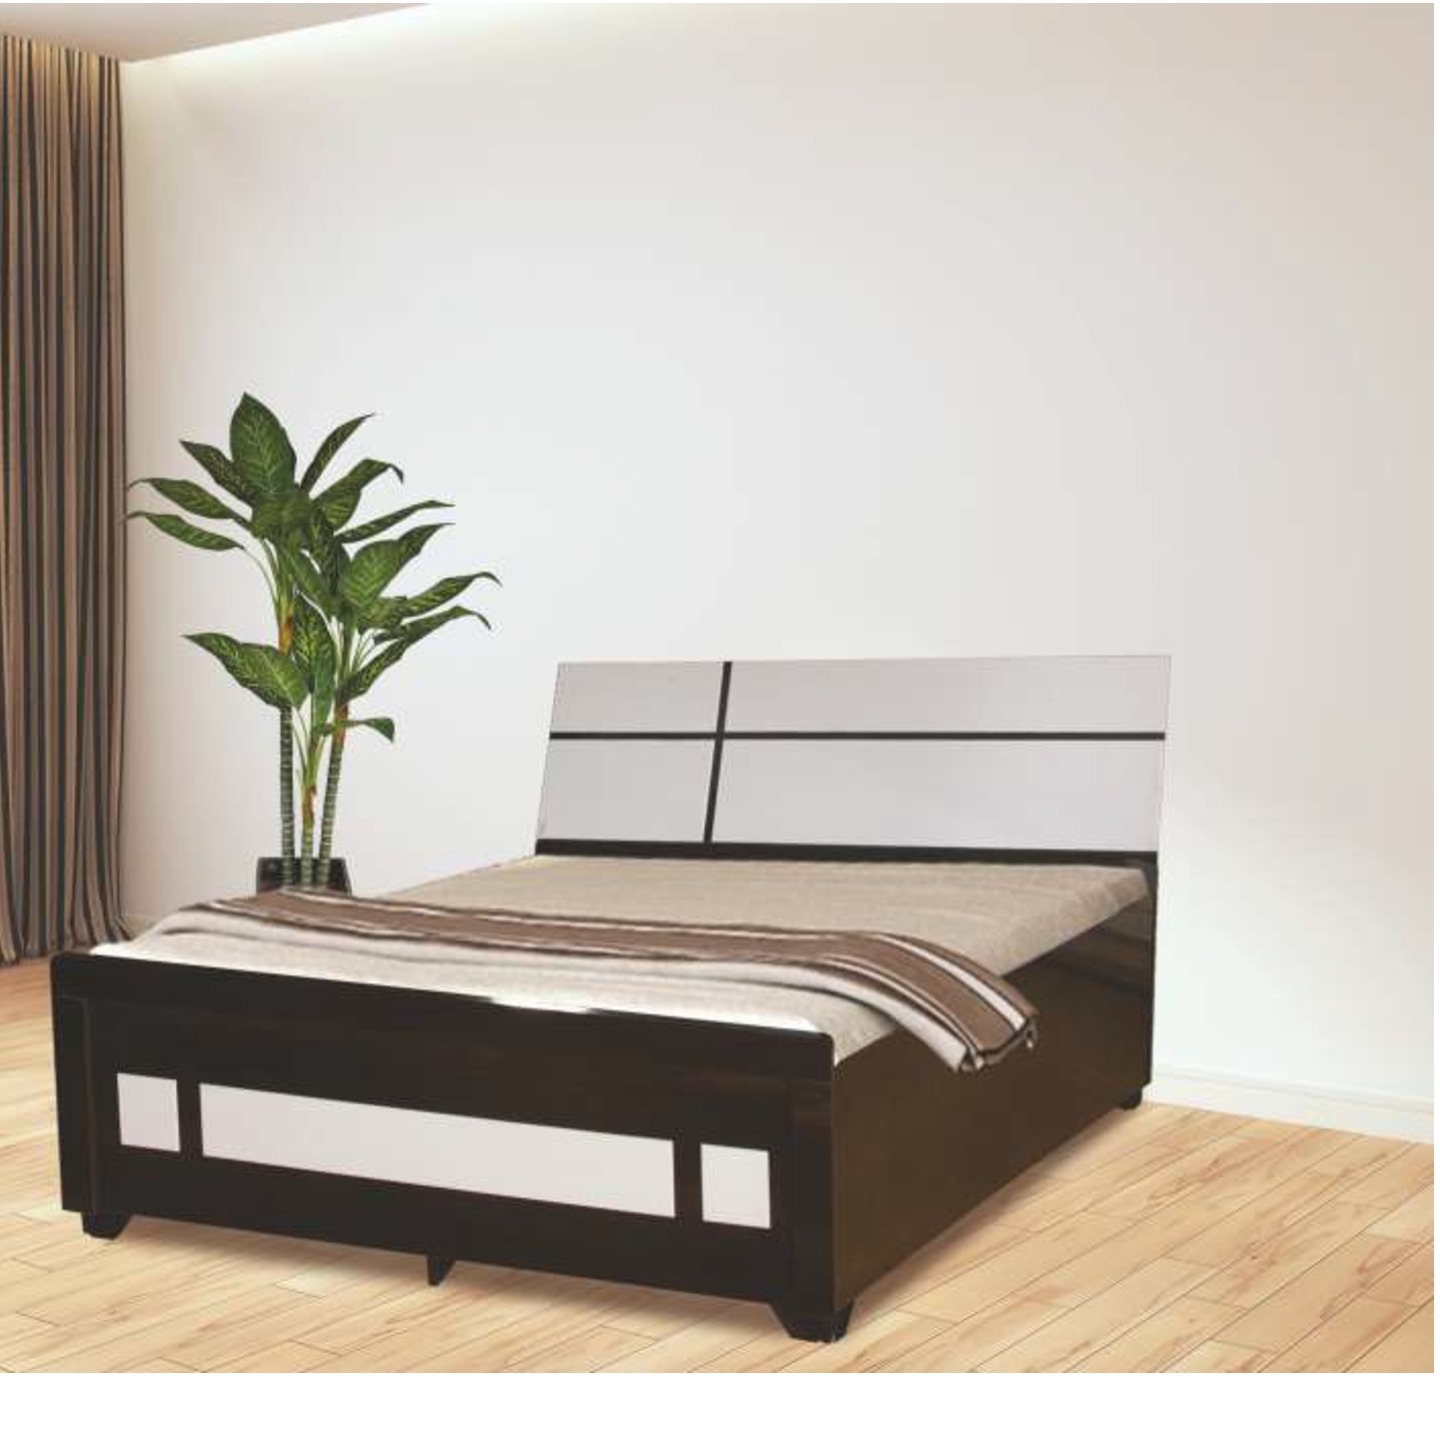 HS Gifton Bed Size 72x 60 In Colour Wenge Hel White Pu